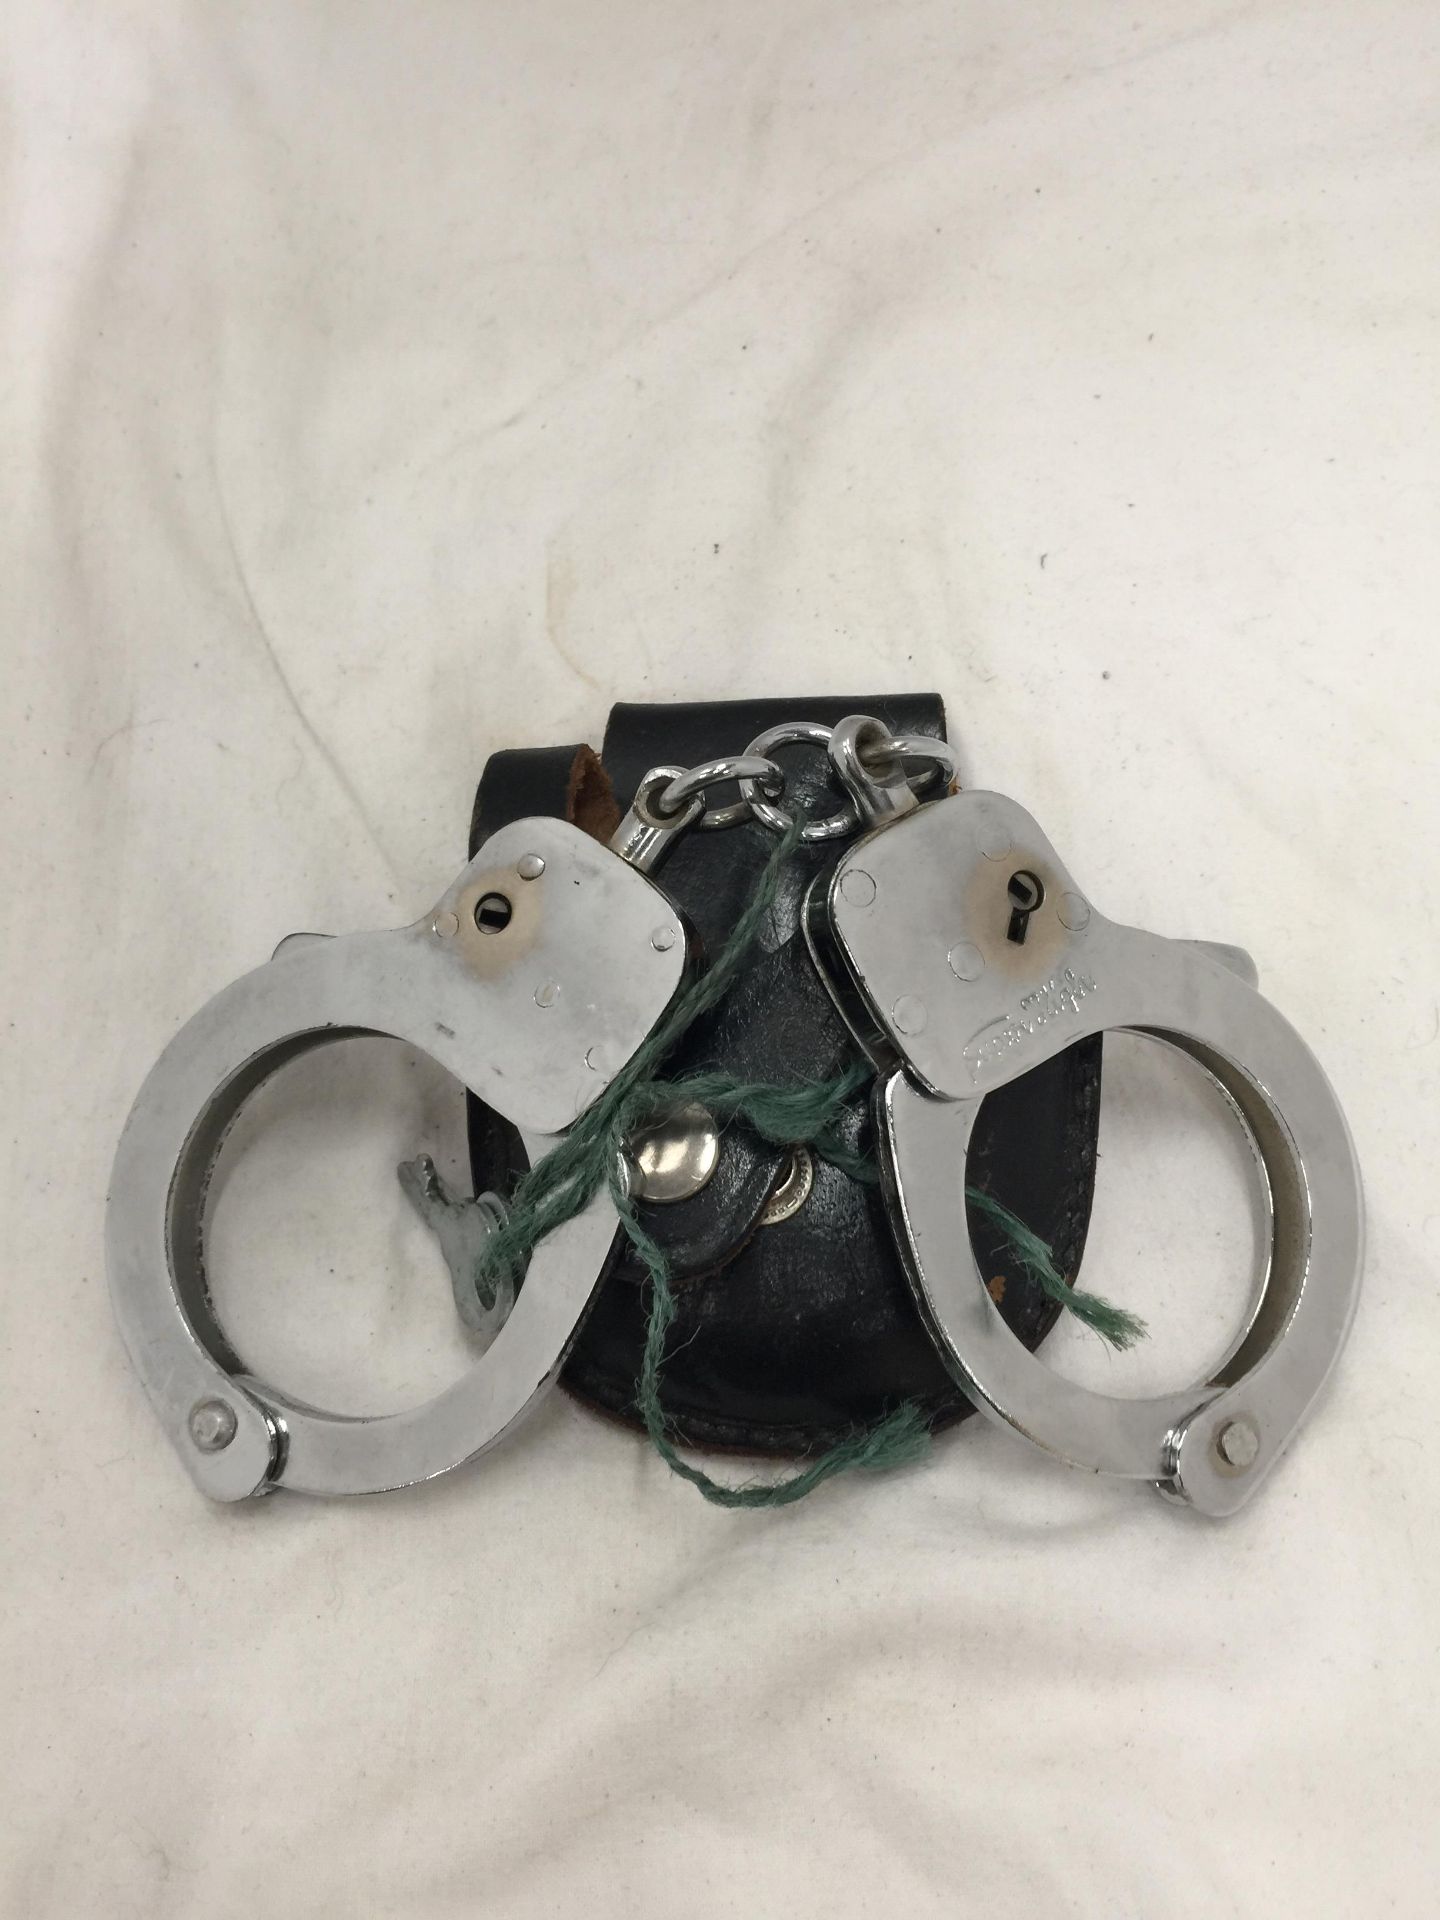 A PAIR OF HANDCUFFS WITH KEY IN A LEATHER POUCH - Image 4 of 6